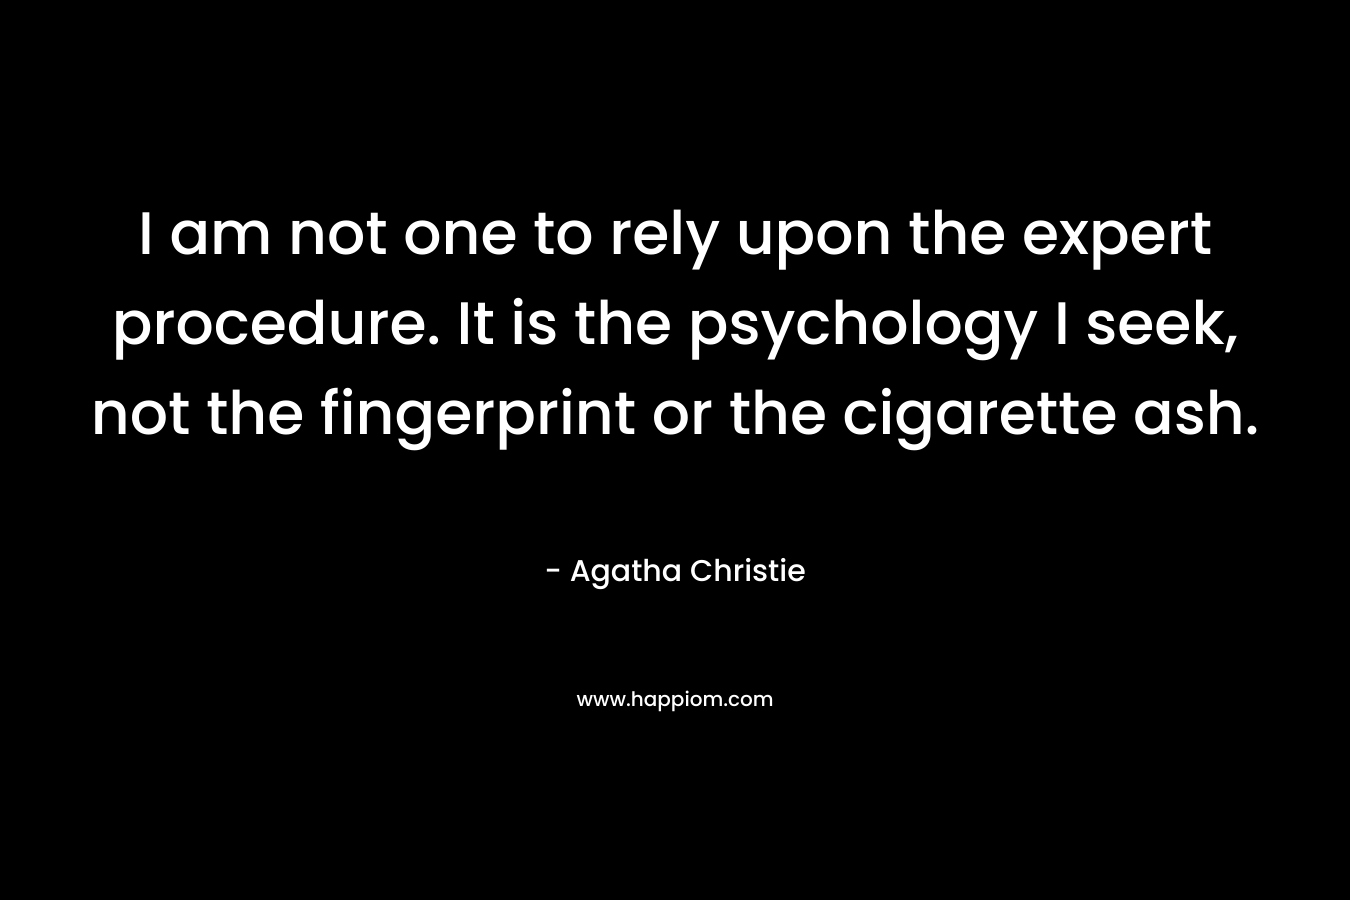 I am not one to rely upon the expert procedure. It is the psychology I seek, not the fingerprint or the cigarette ash.